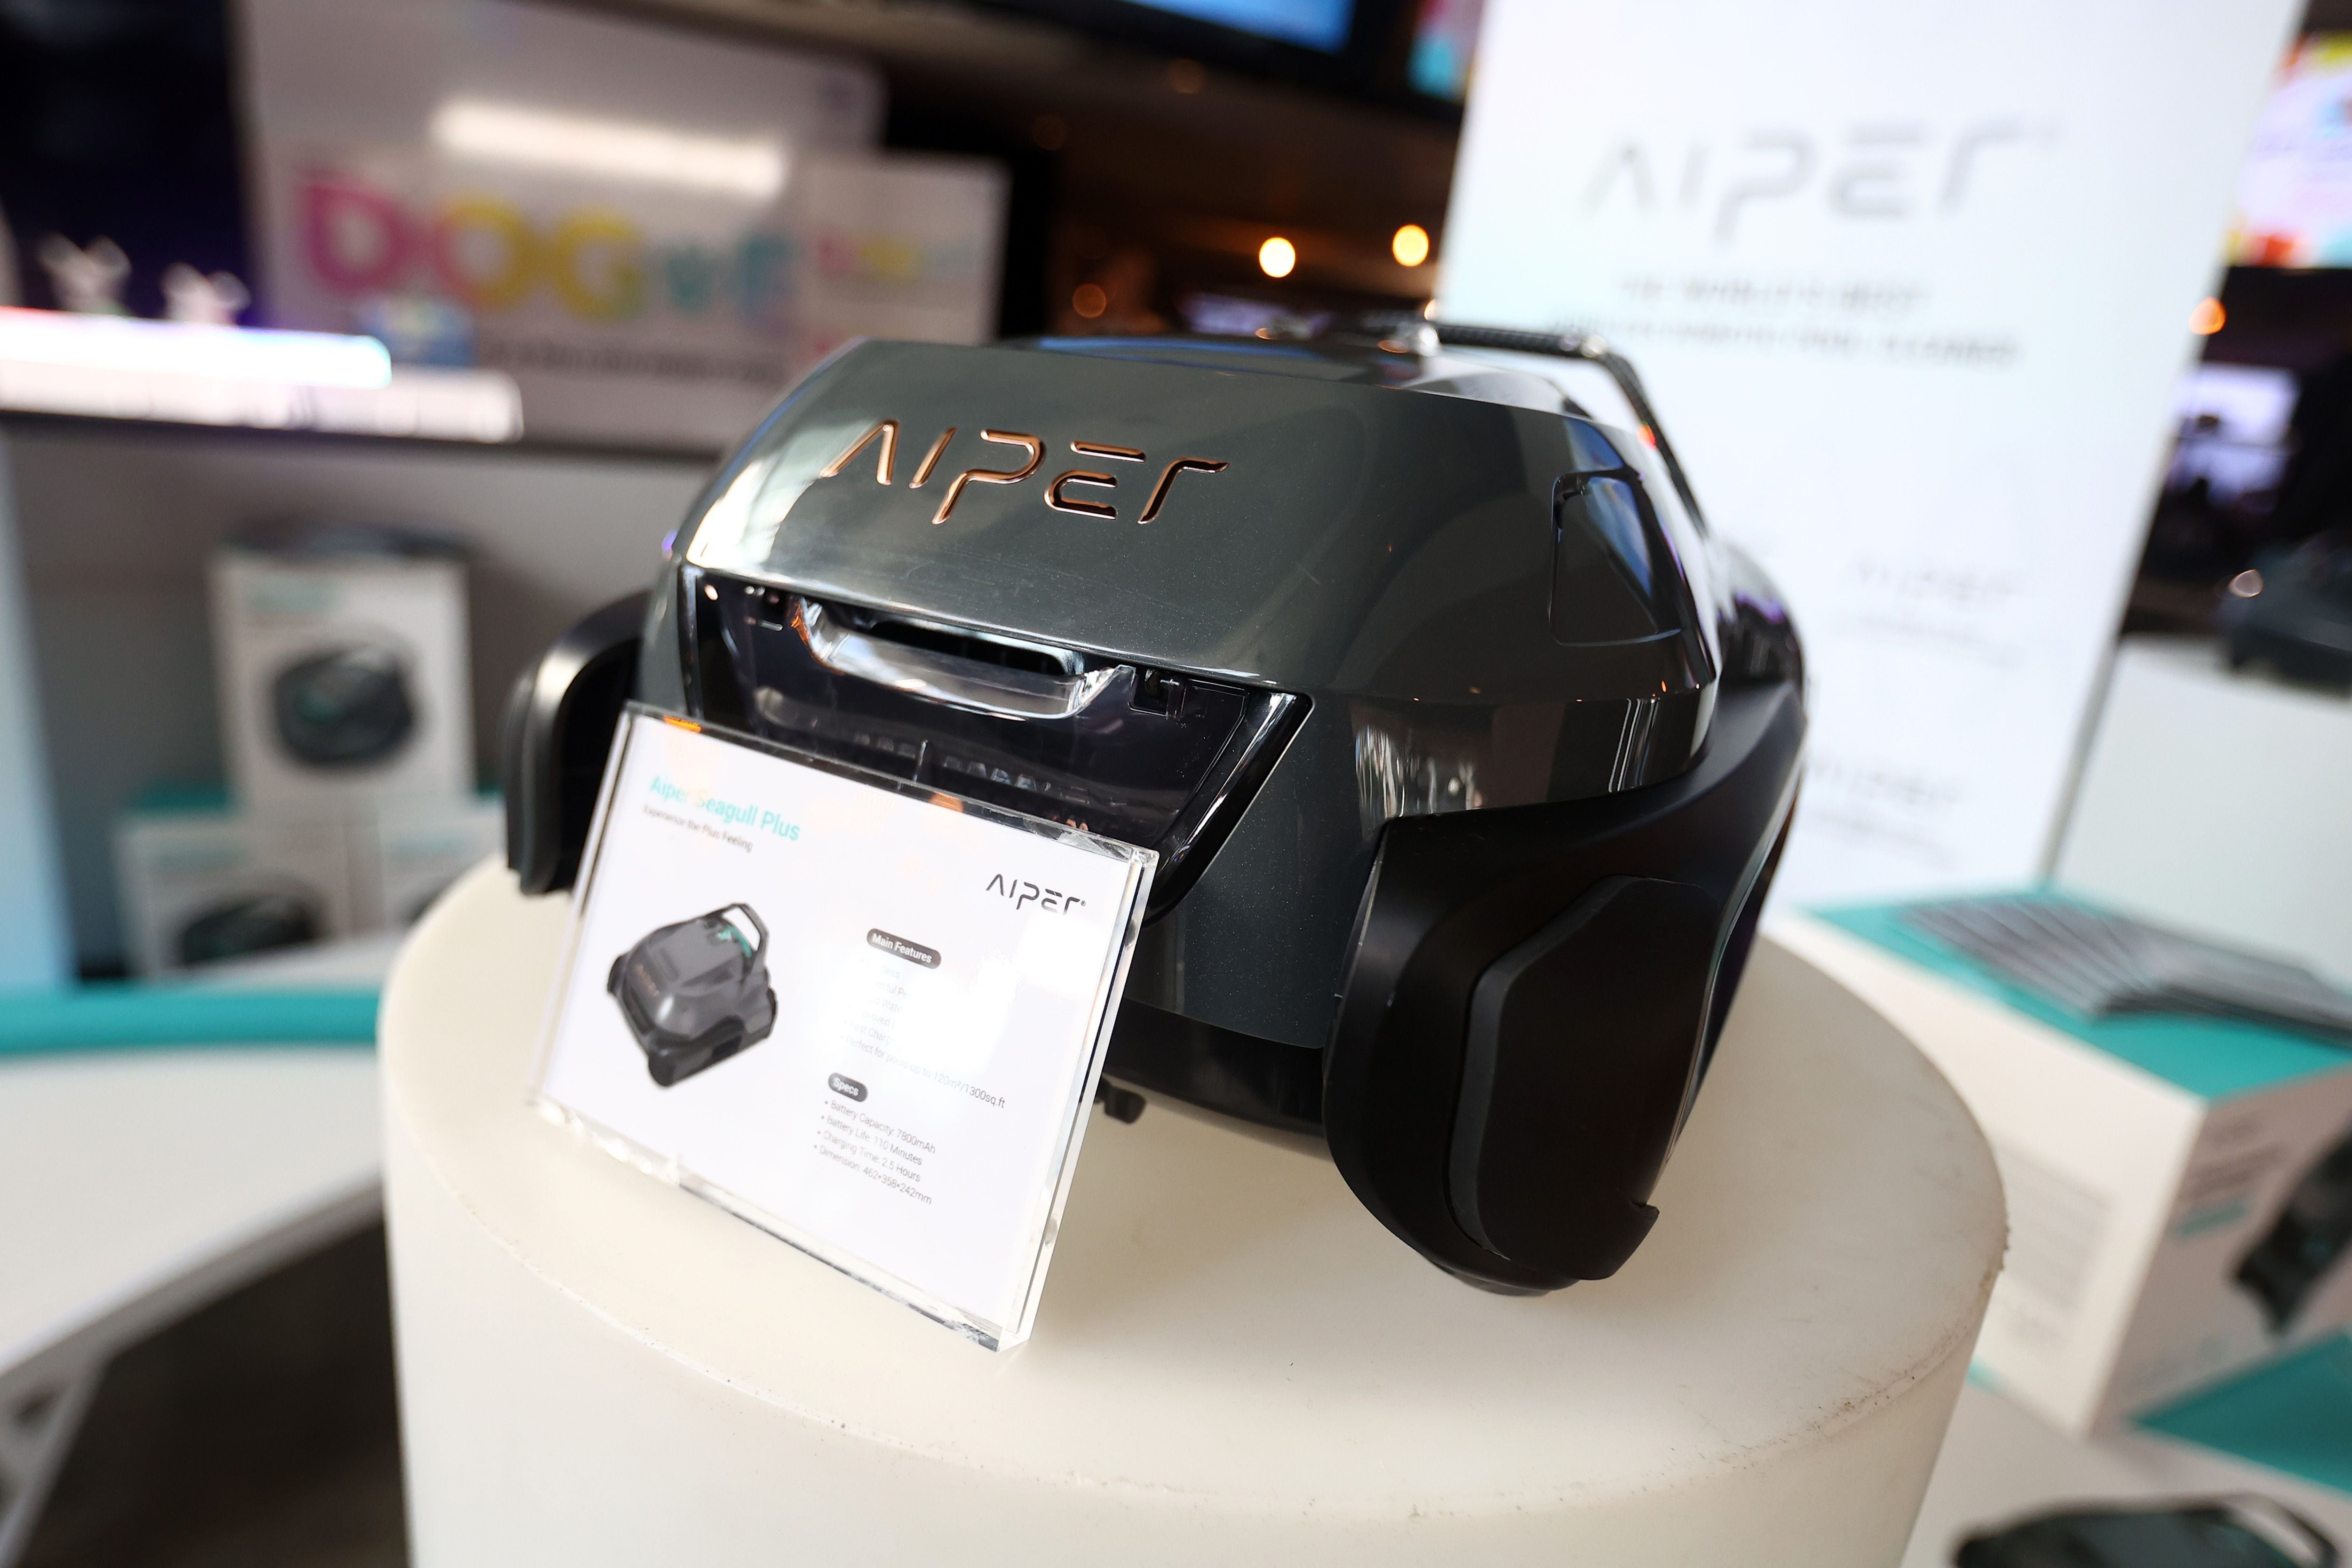 The cordless robot pool cleaner by Aiper